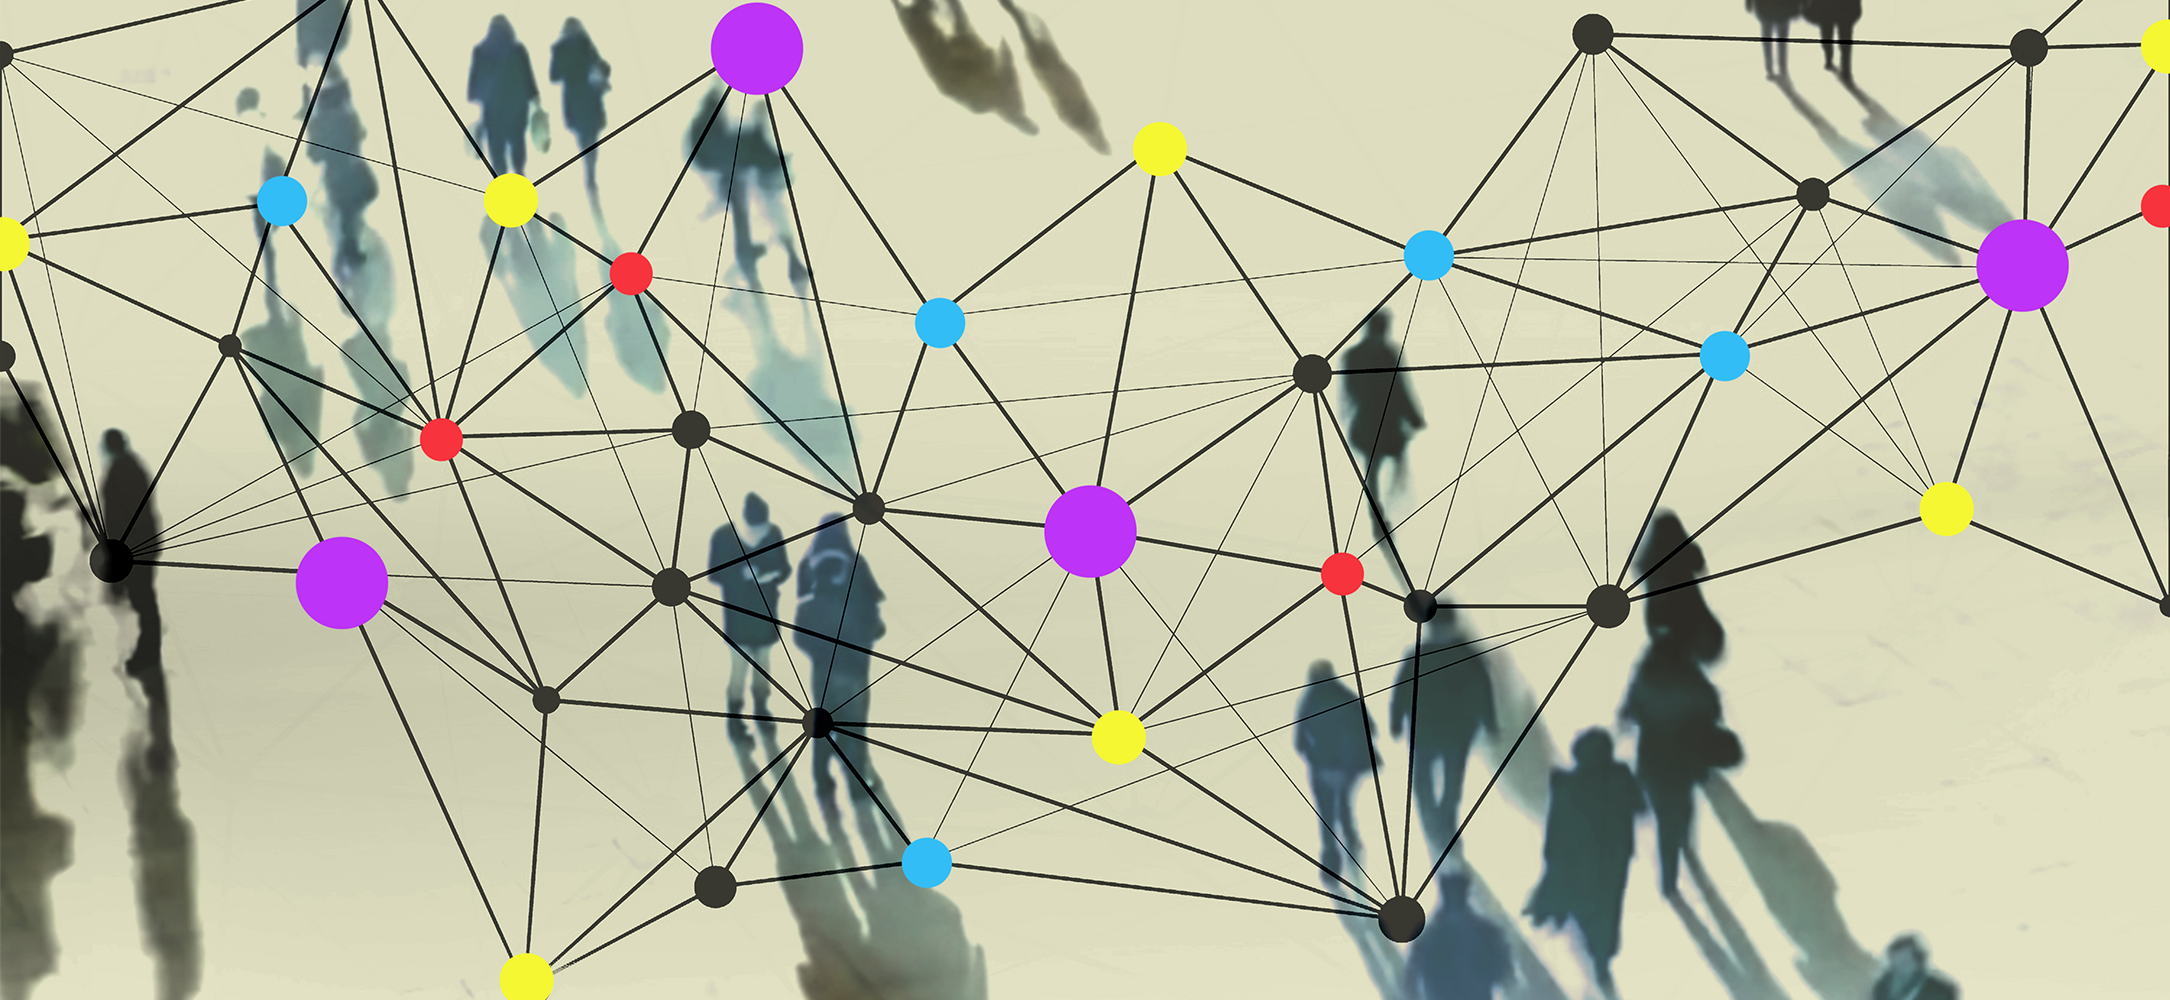 Multi-colored dots connected in a web. In the background, silhouetted people walking. This symbolizes a customer journey map.